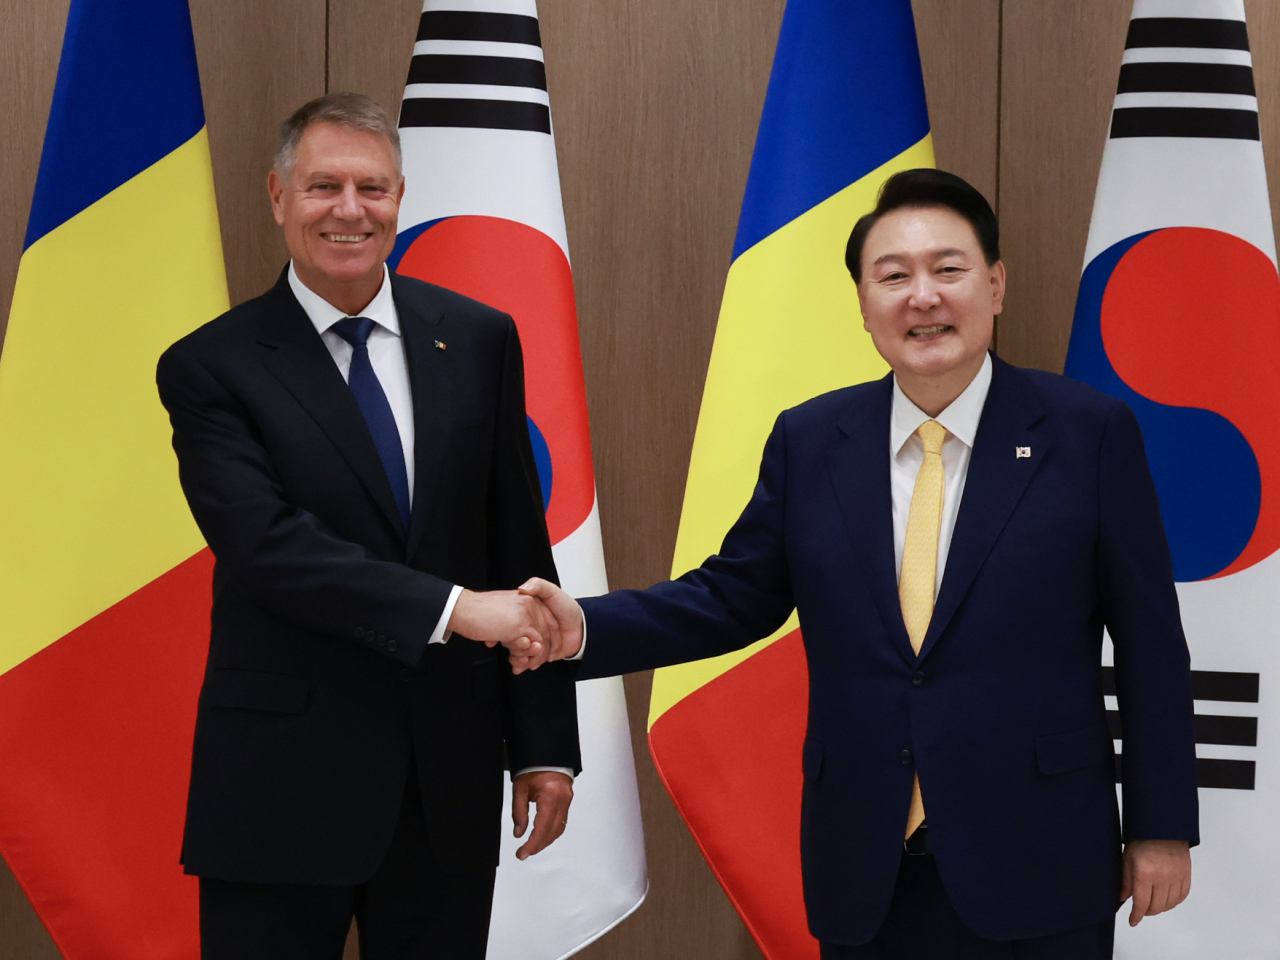 President Yoon Suk Yeol (right) shakes hands with Romanian President Klaus Iohannis during Iohannis's official visit to South Korea at Yoon's office on Tuesday. (Yonhap)